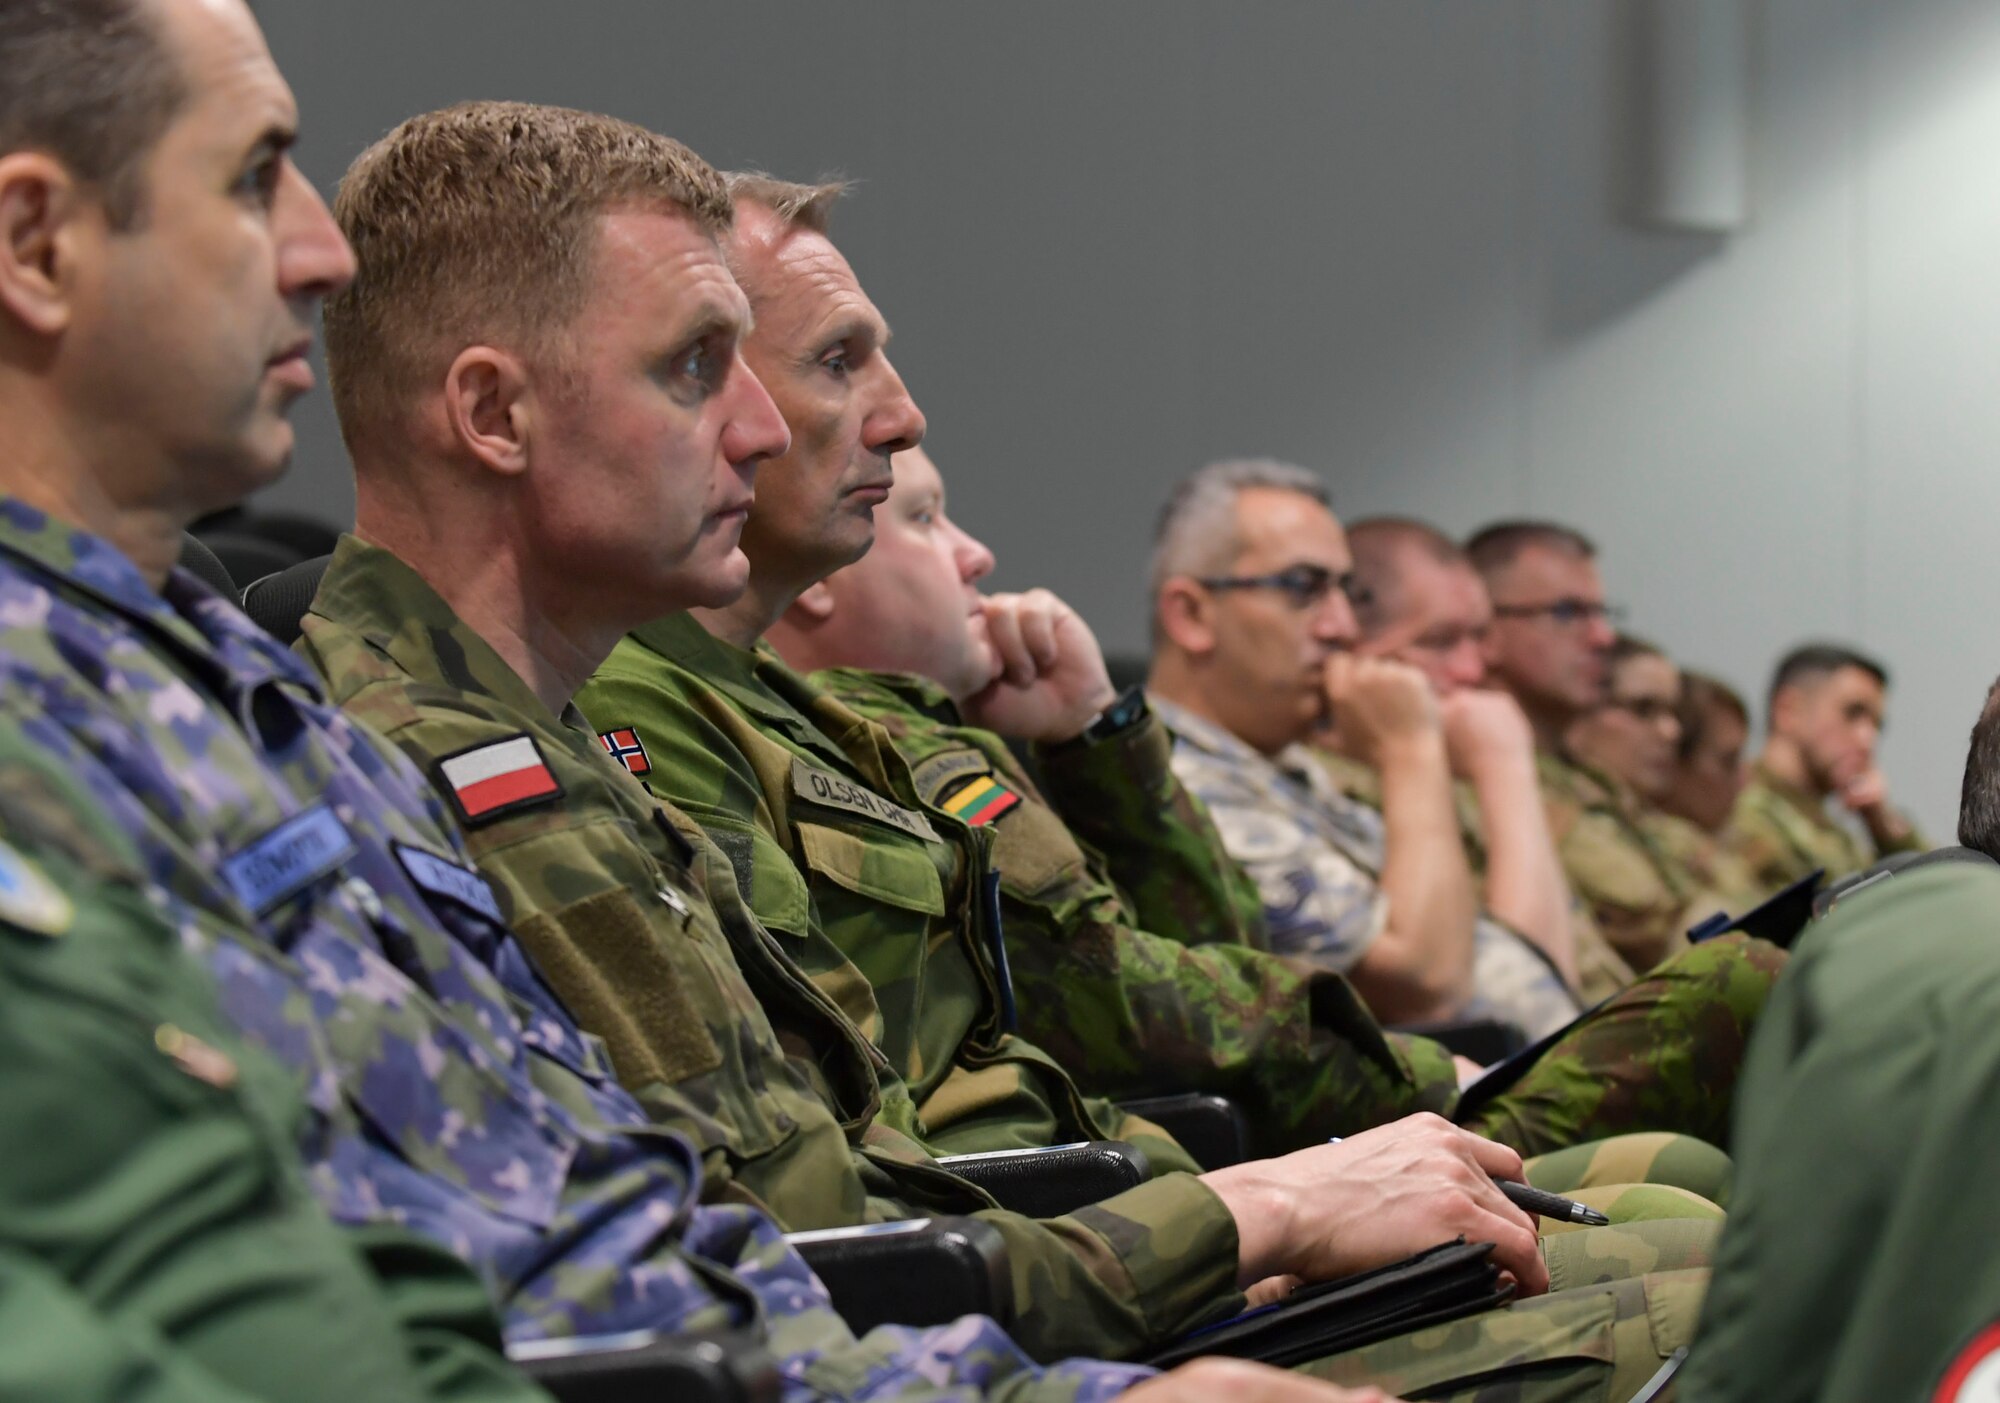 Senior enlisted leaders from across Europe attend the first European Air Forces Senior Enlisted Conference at Ramstein Air Base, Germany, May 21, 2019. Participants from 19 countries, including the United States, discussed multiple topics to help enhance personal growth, increase interoperability, and build partnership capacity. (U.S. Navy photo by Mass Communication Specialist 2nd Class Deanna C. Gonzales)